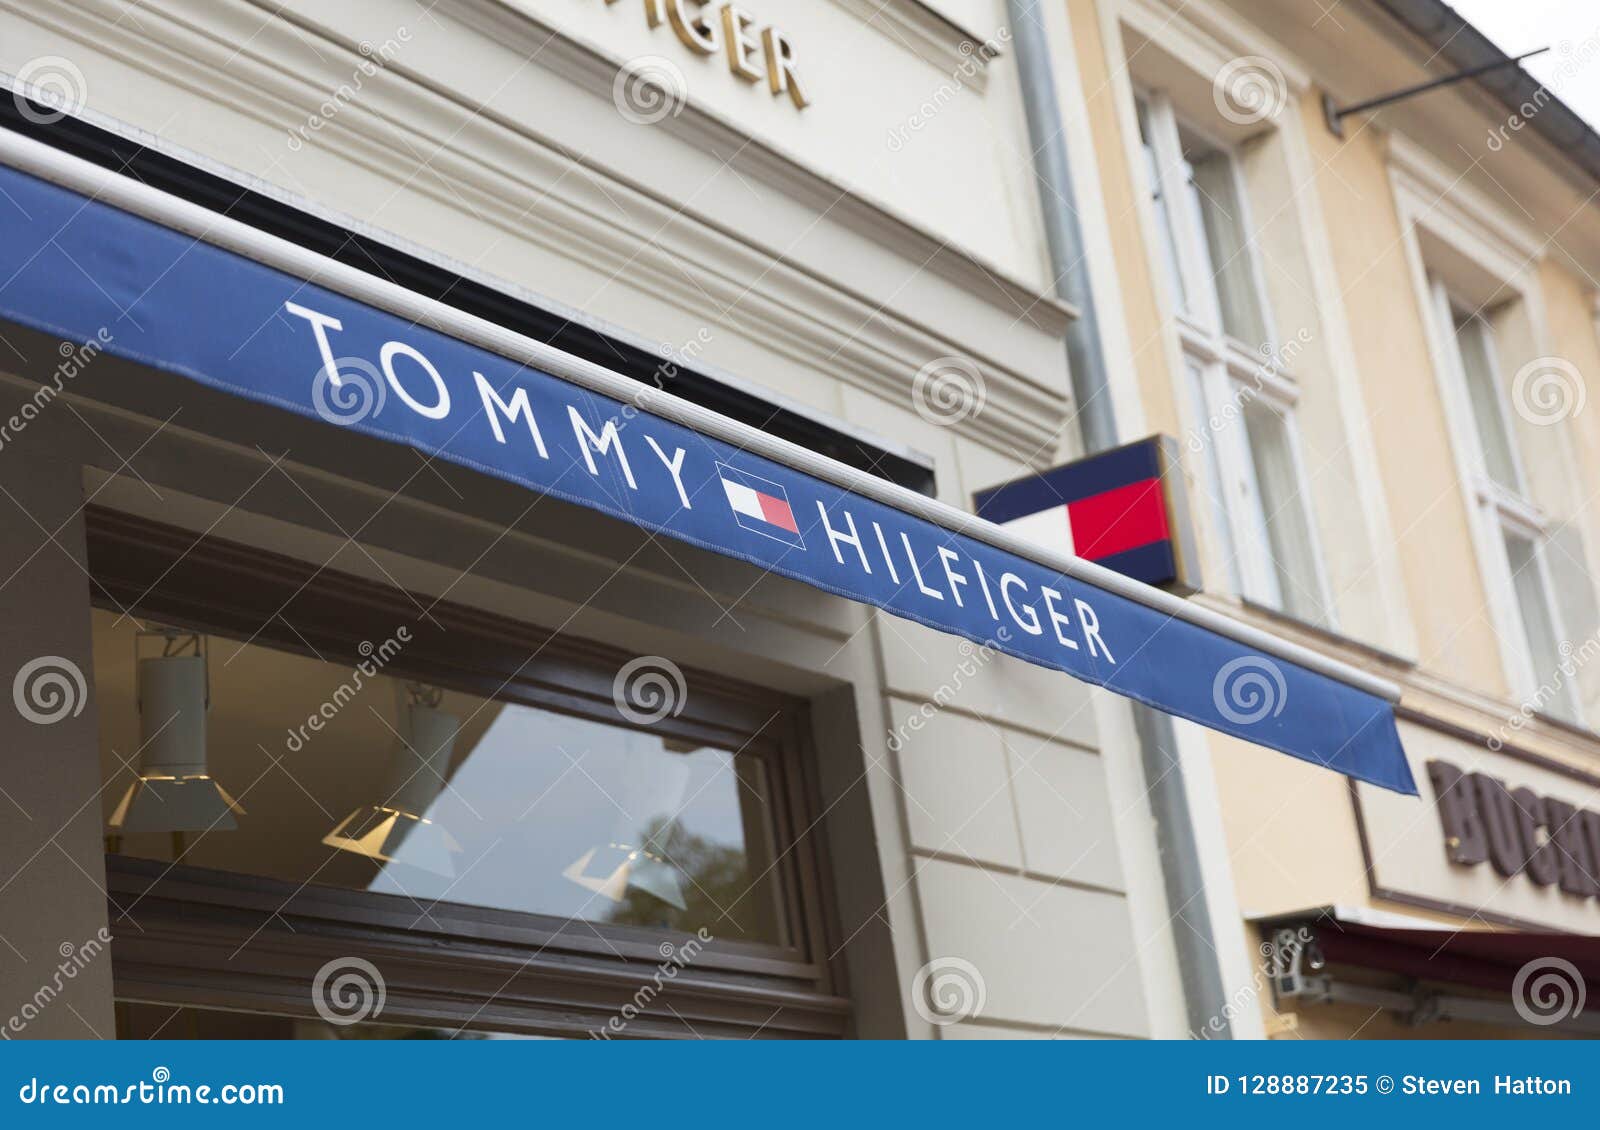 Potsdam, Berlin, Europe: 20th August 2018: Tommy Hilfiger Store Image - resolution, fashion: 128887235